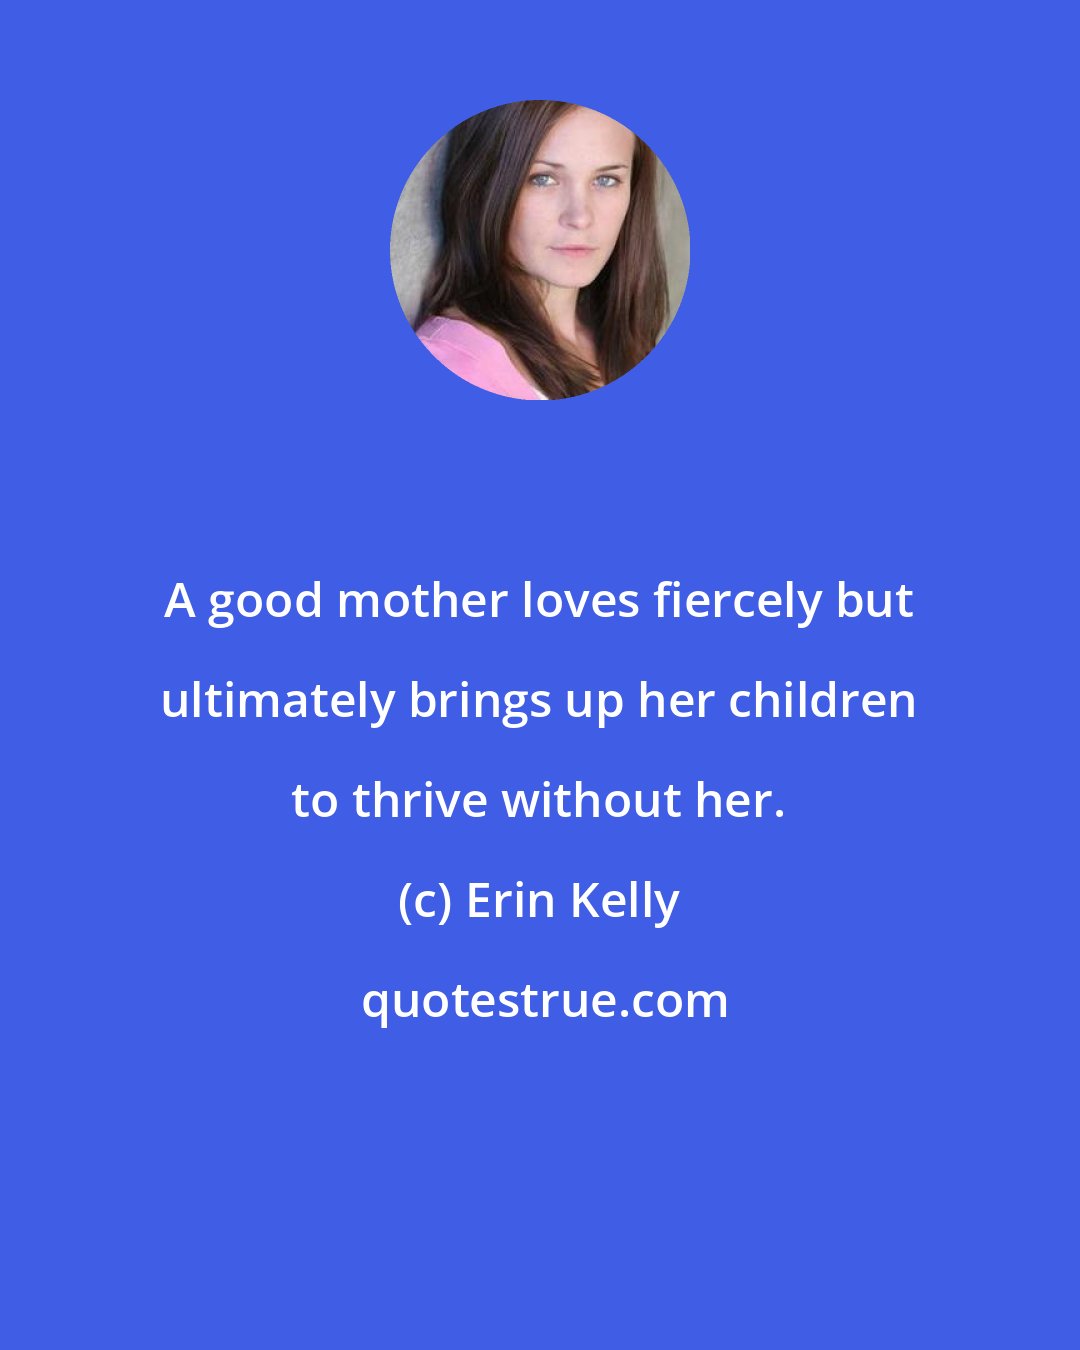 Erin Kelly: A good mother loves fiercely but ultimately brings up her children to thrive without her.